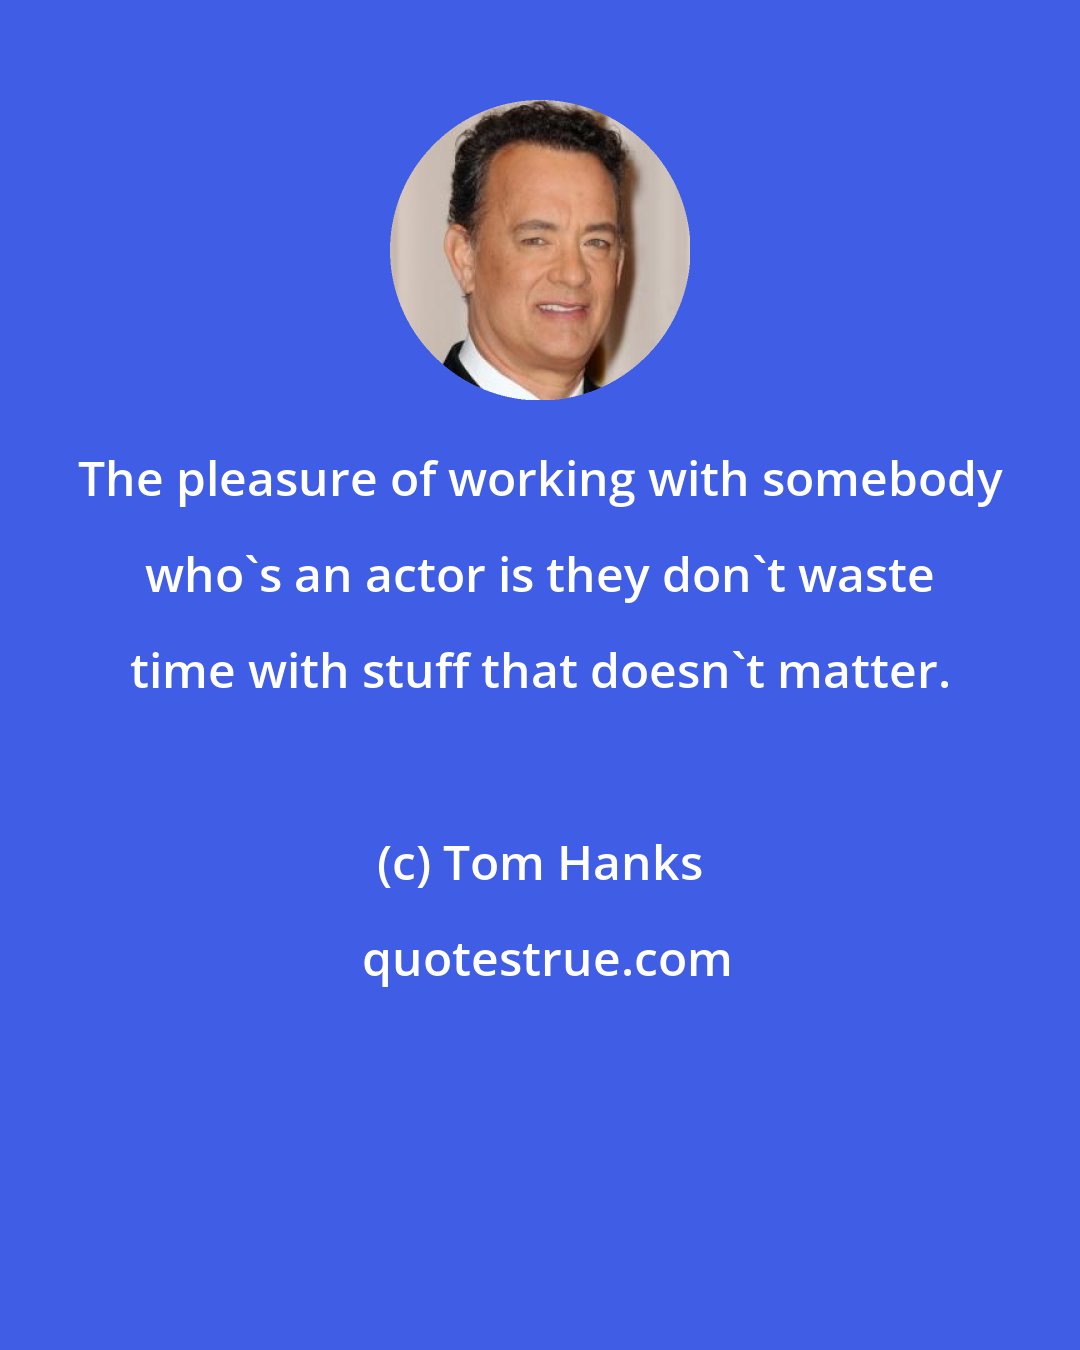 Tom Hanks: The pleasure of working with somebody who's an actor is they don't waste time with stuff that doesn't matter.